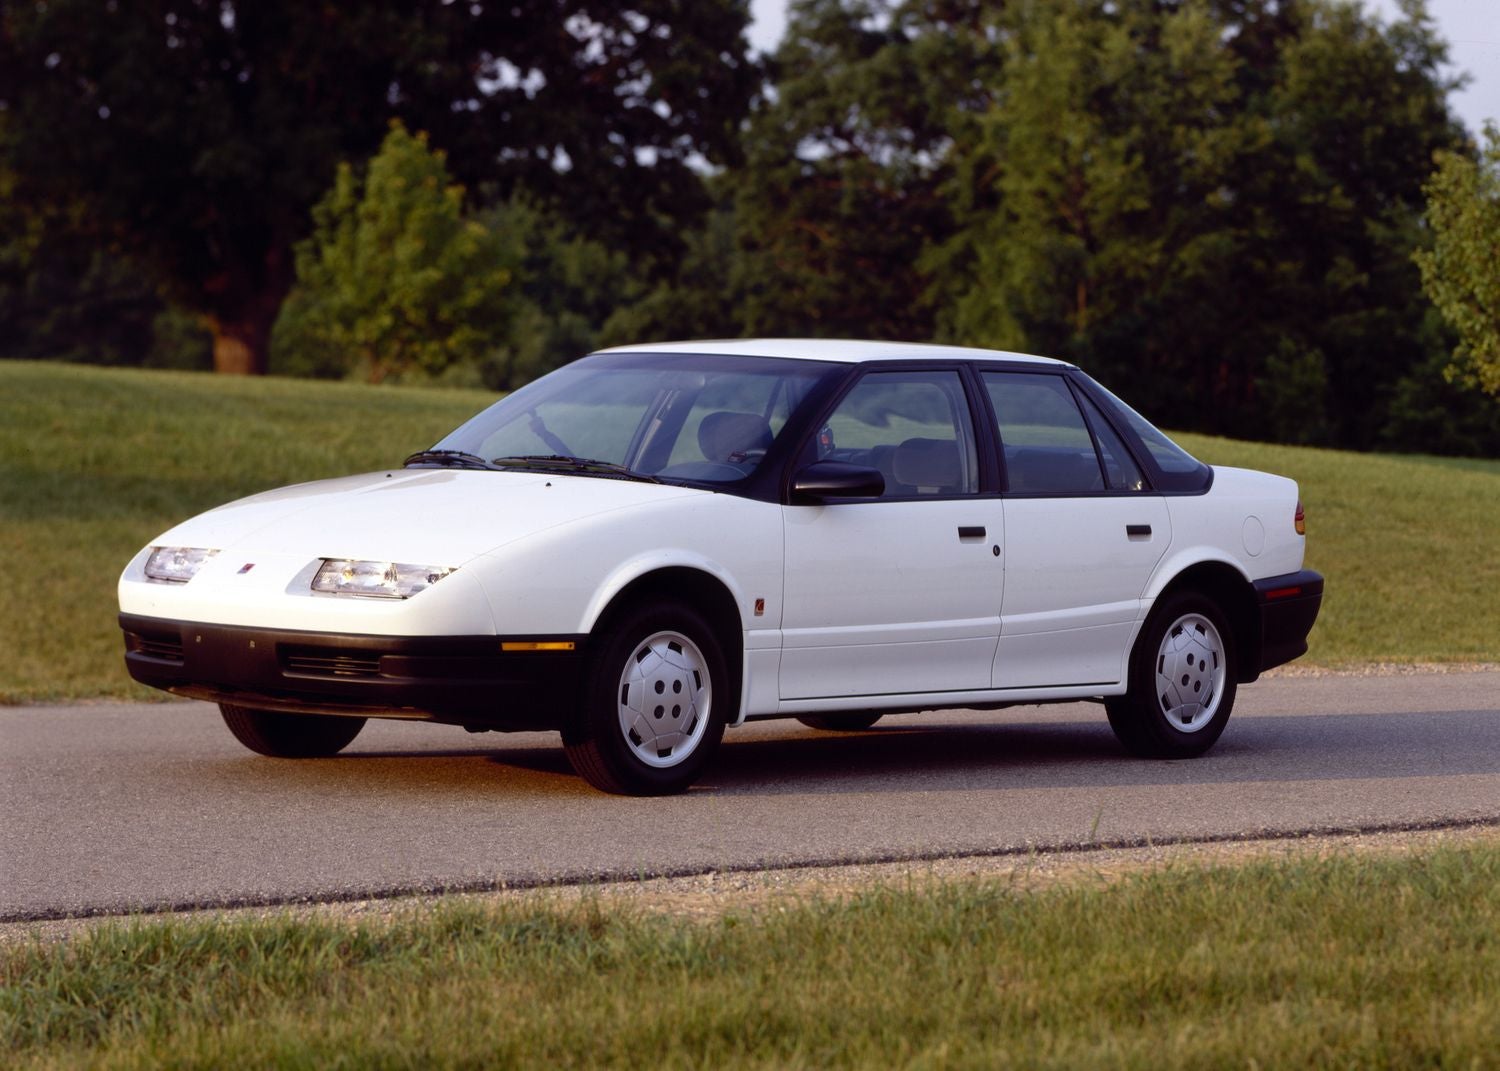 Saturn the most indifferent automotive brand?